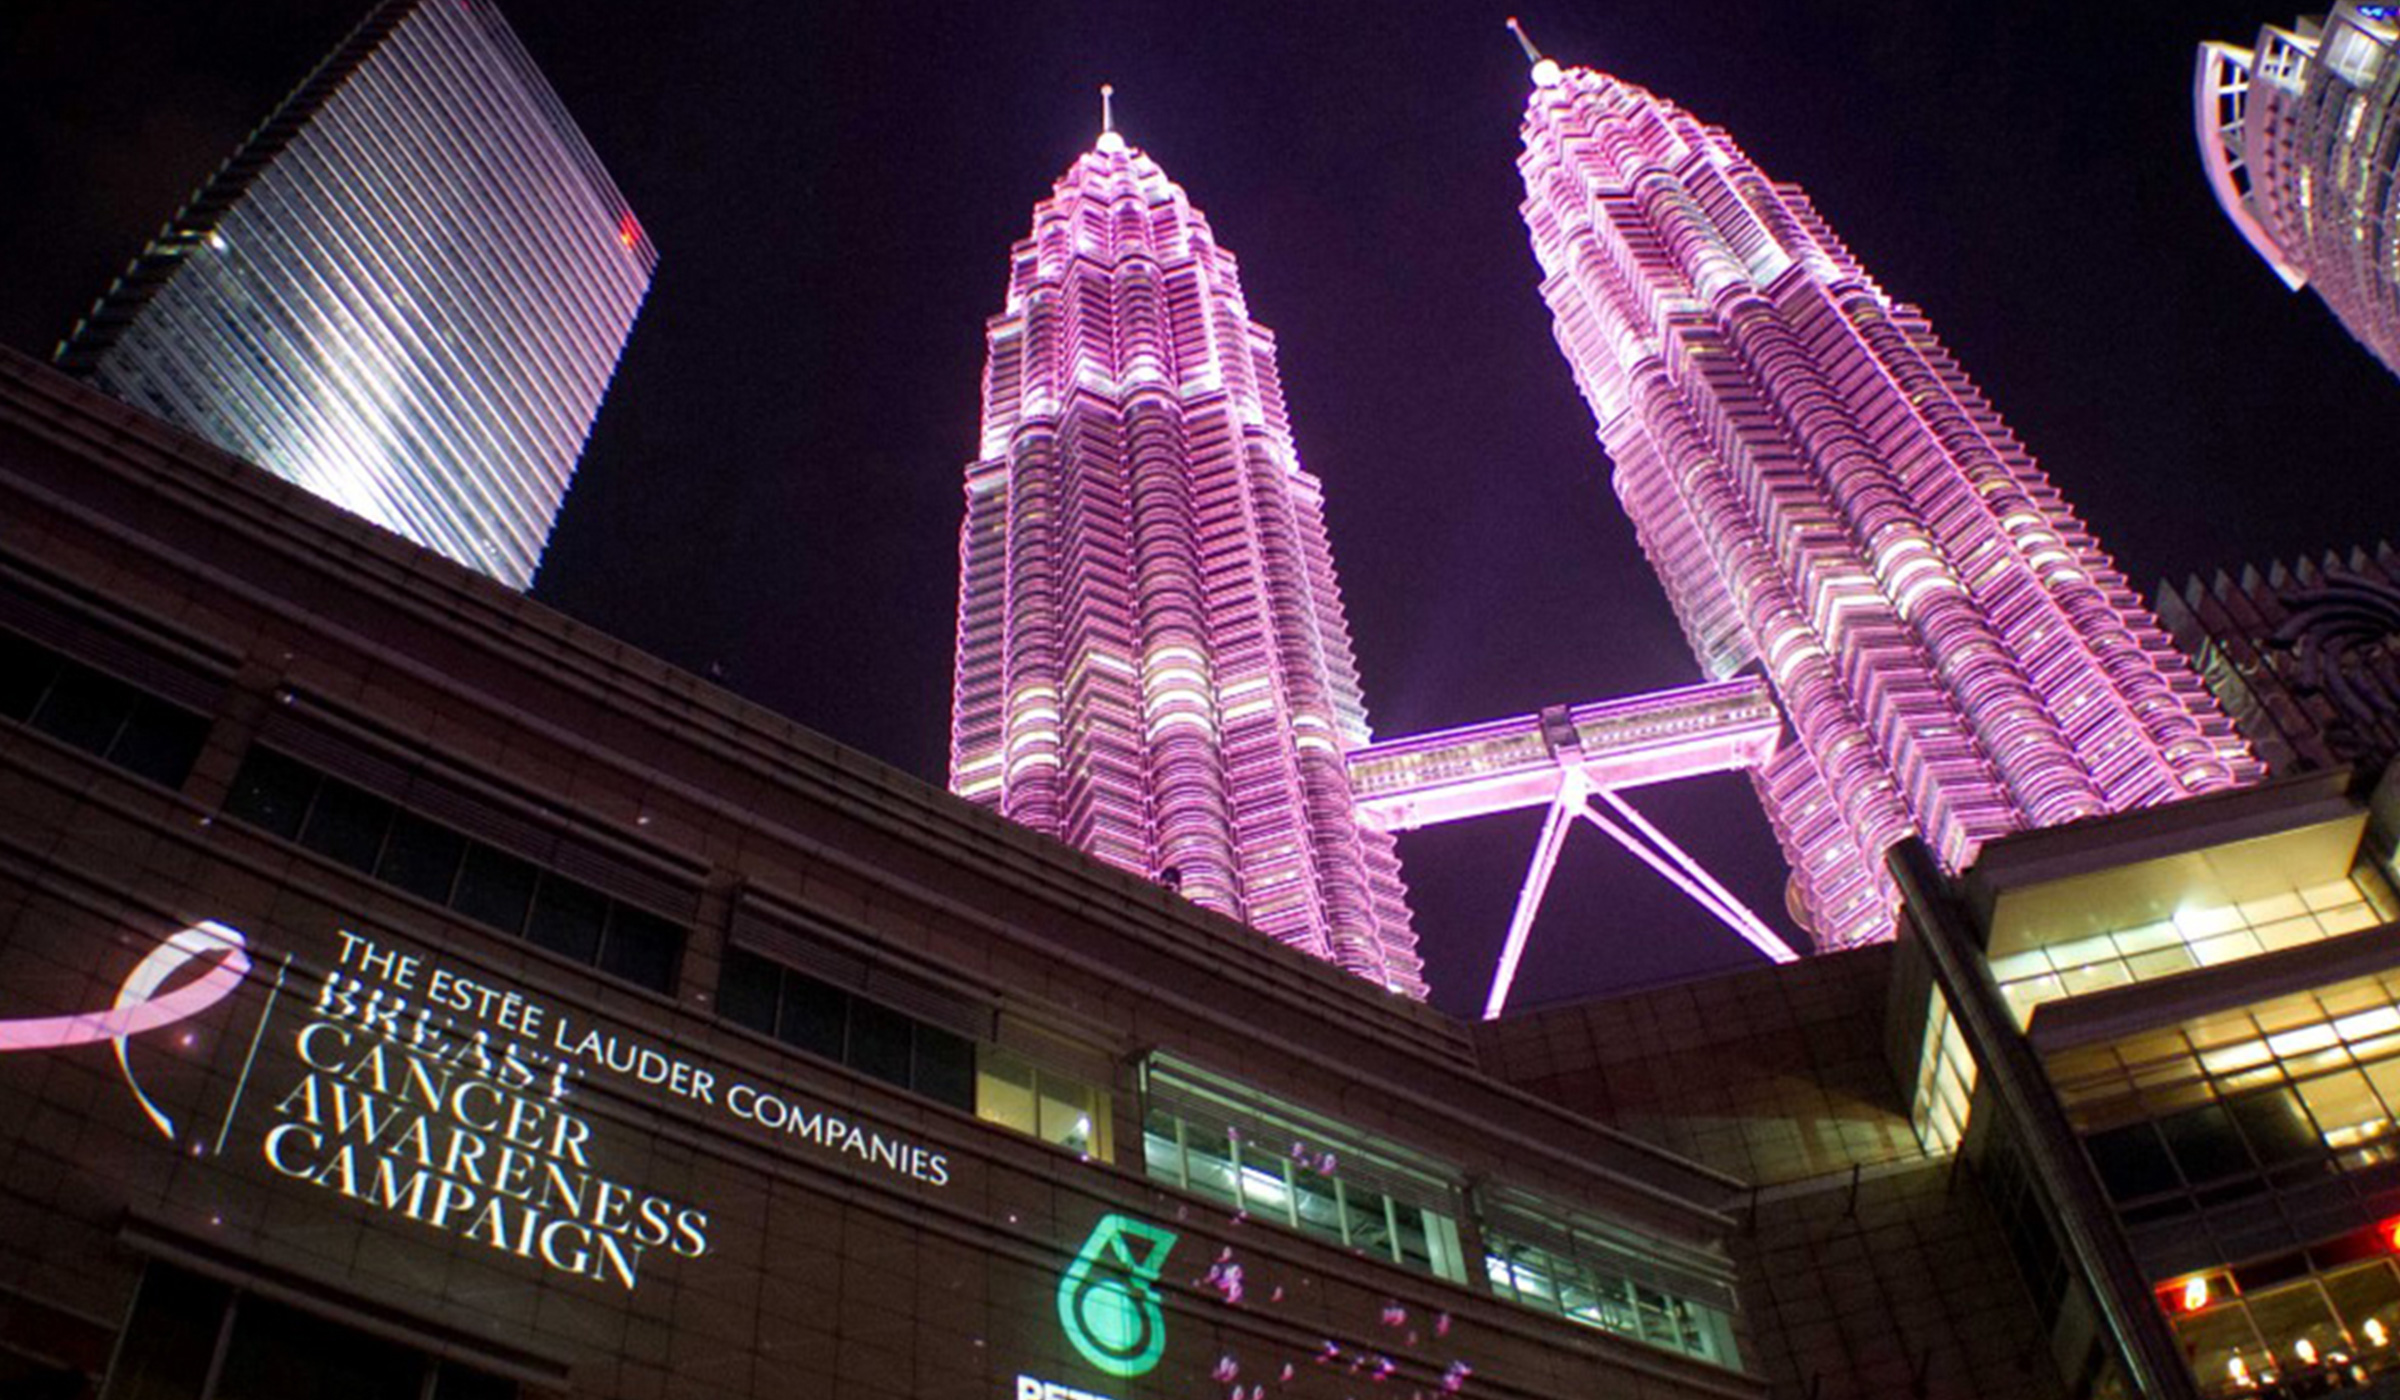 CRAVE Pink Illumination Projection Mapping at Petronas Twin Towers Malaysia